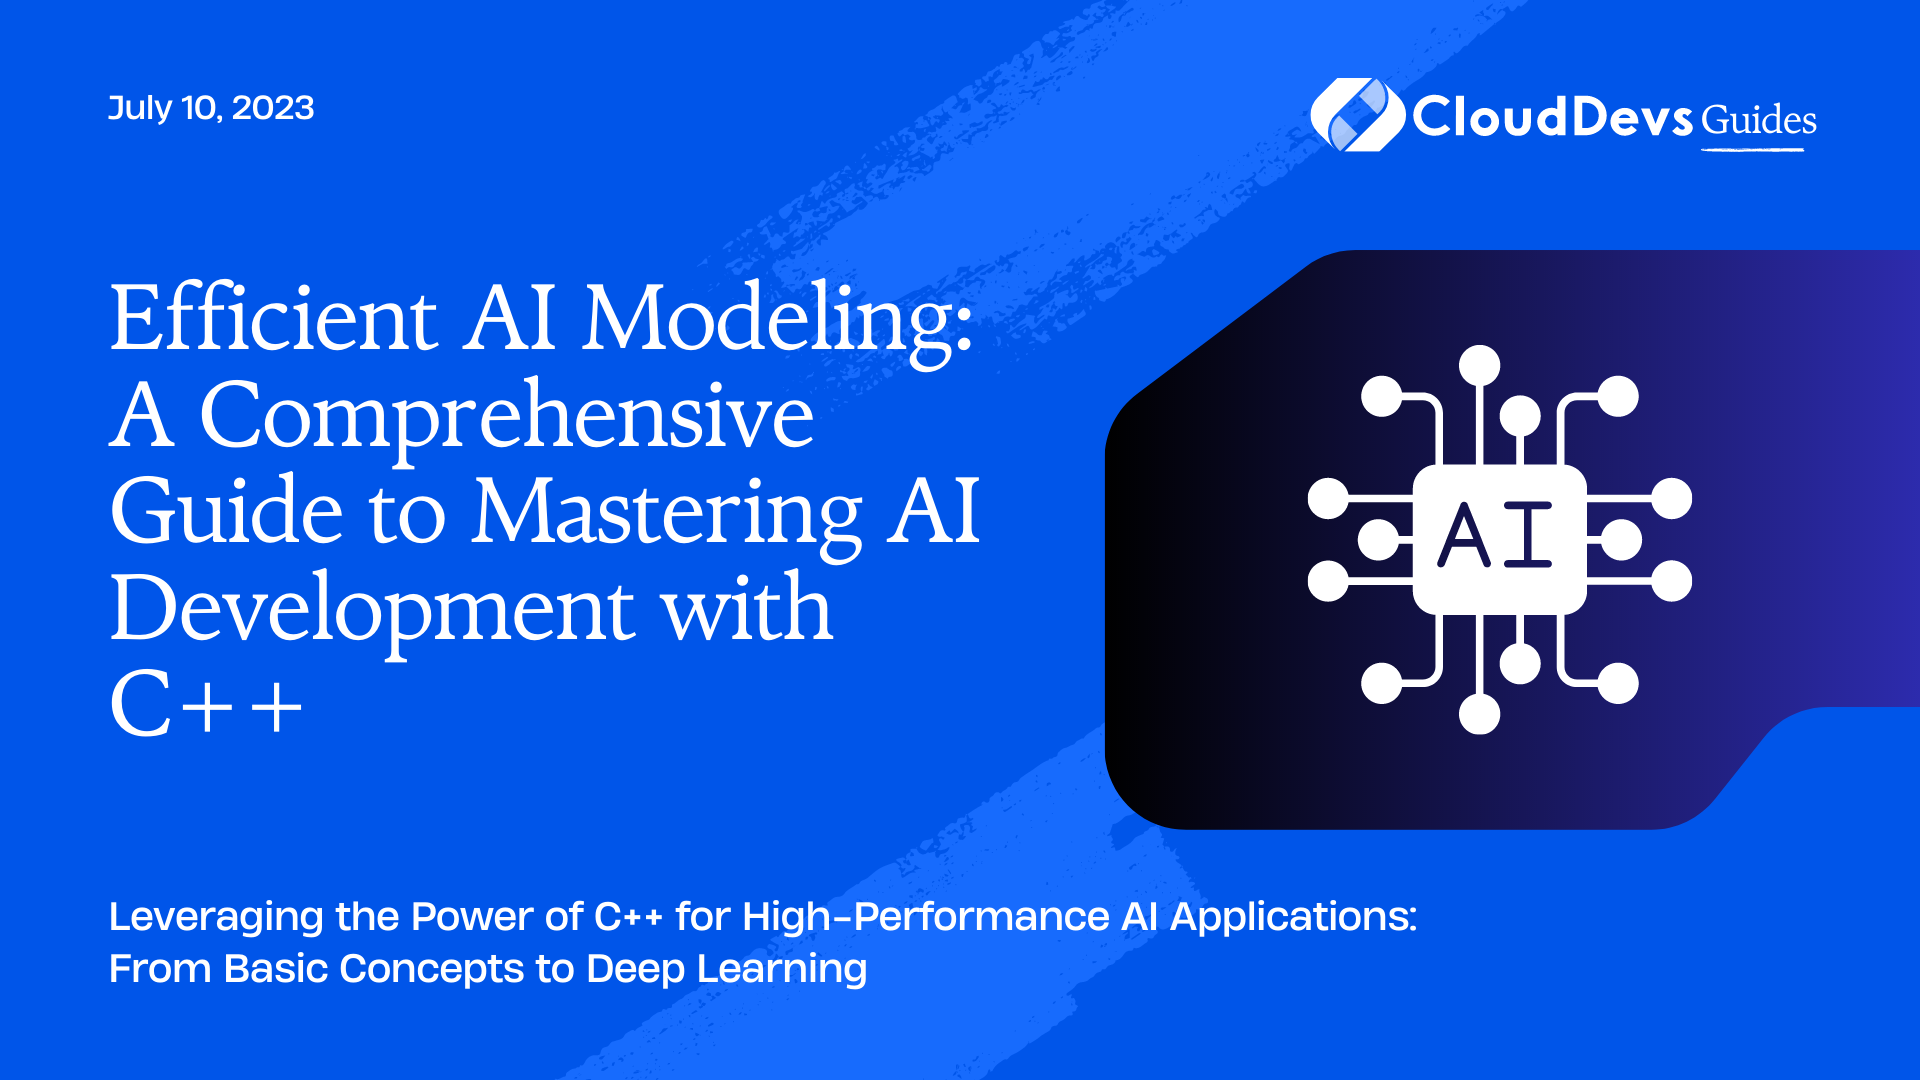 Efficient AI Modeling: A Comprehensive Guide to Mastering AI Development with C++